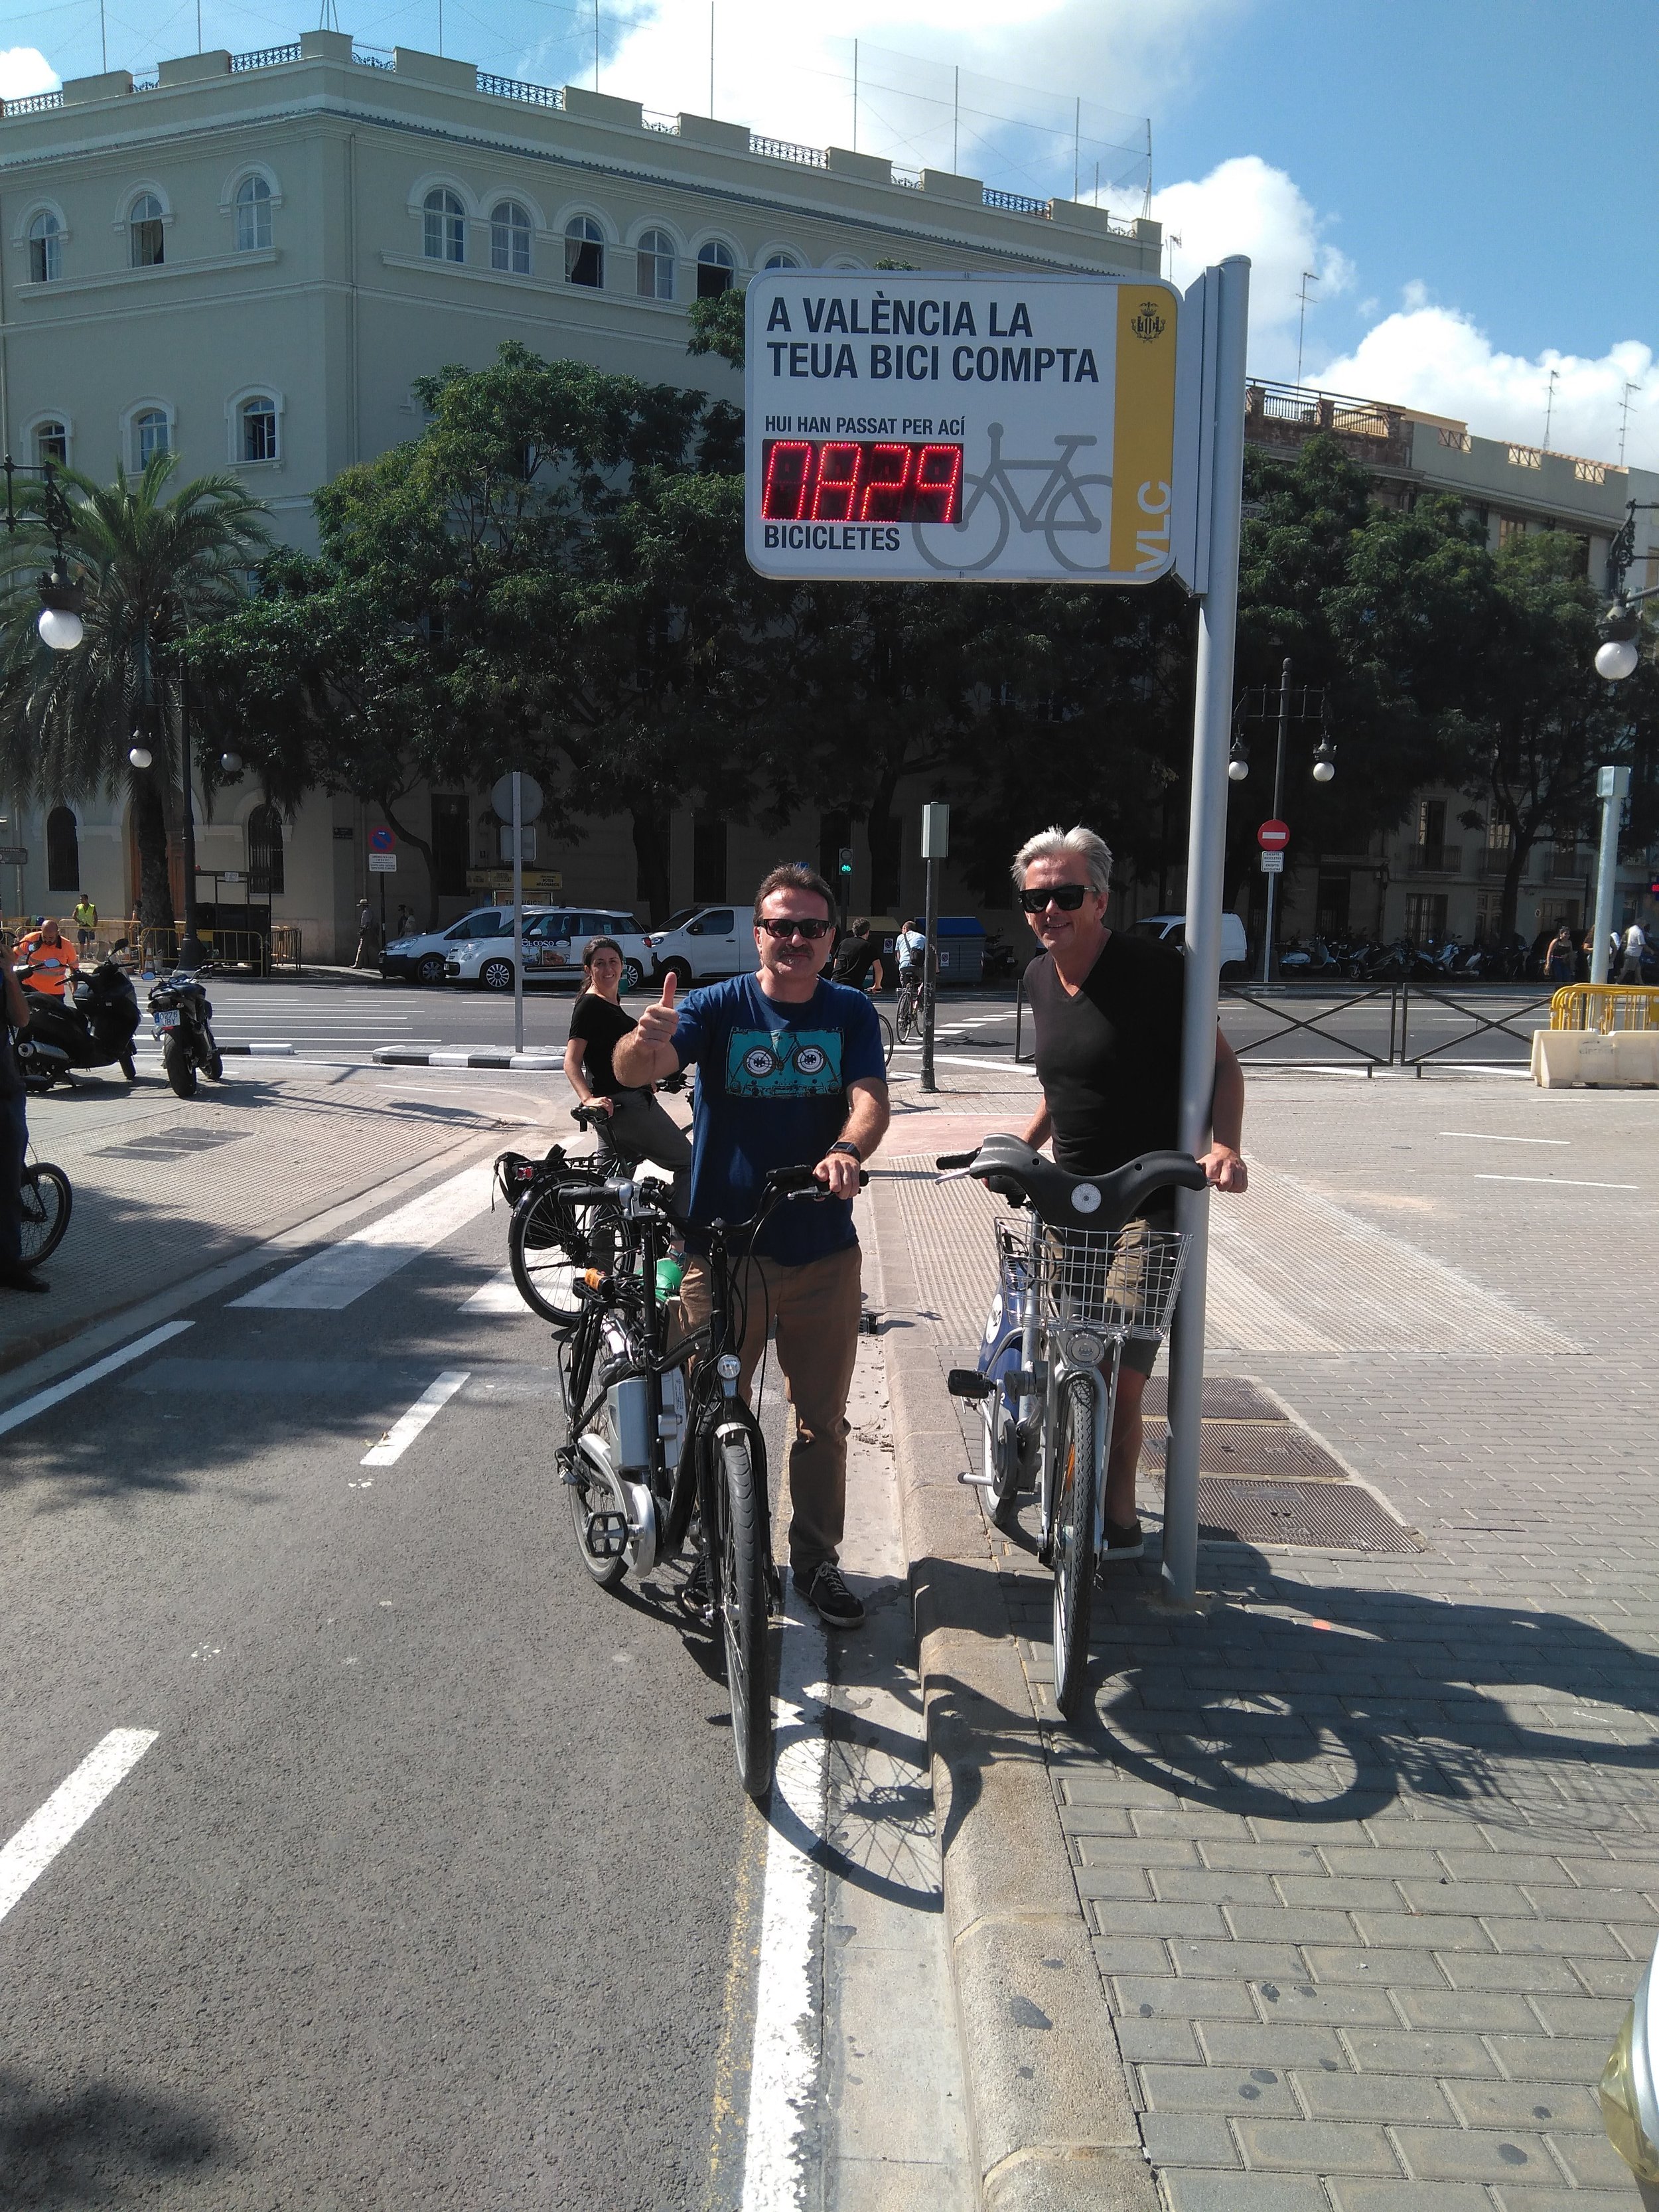  The City of Valencia has installed bicycle counters, like the one pictured here. 